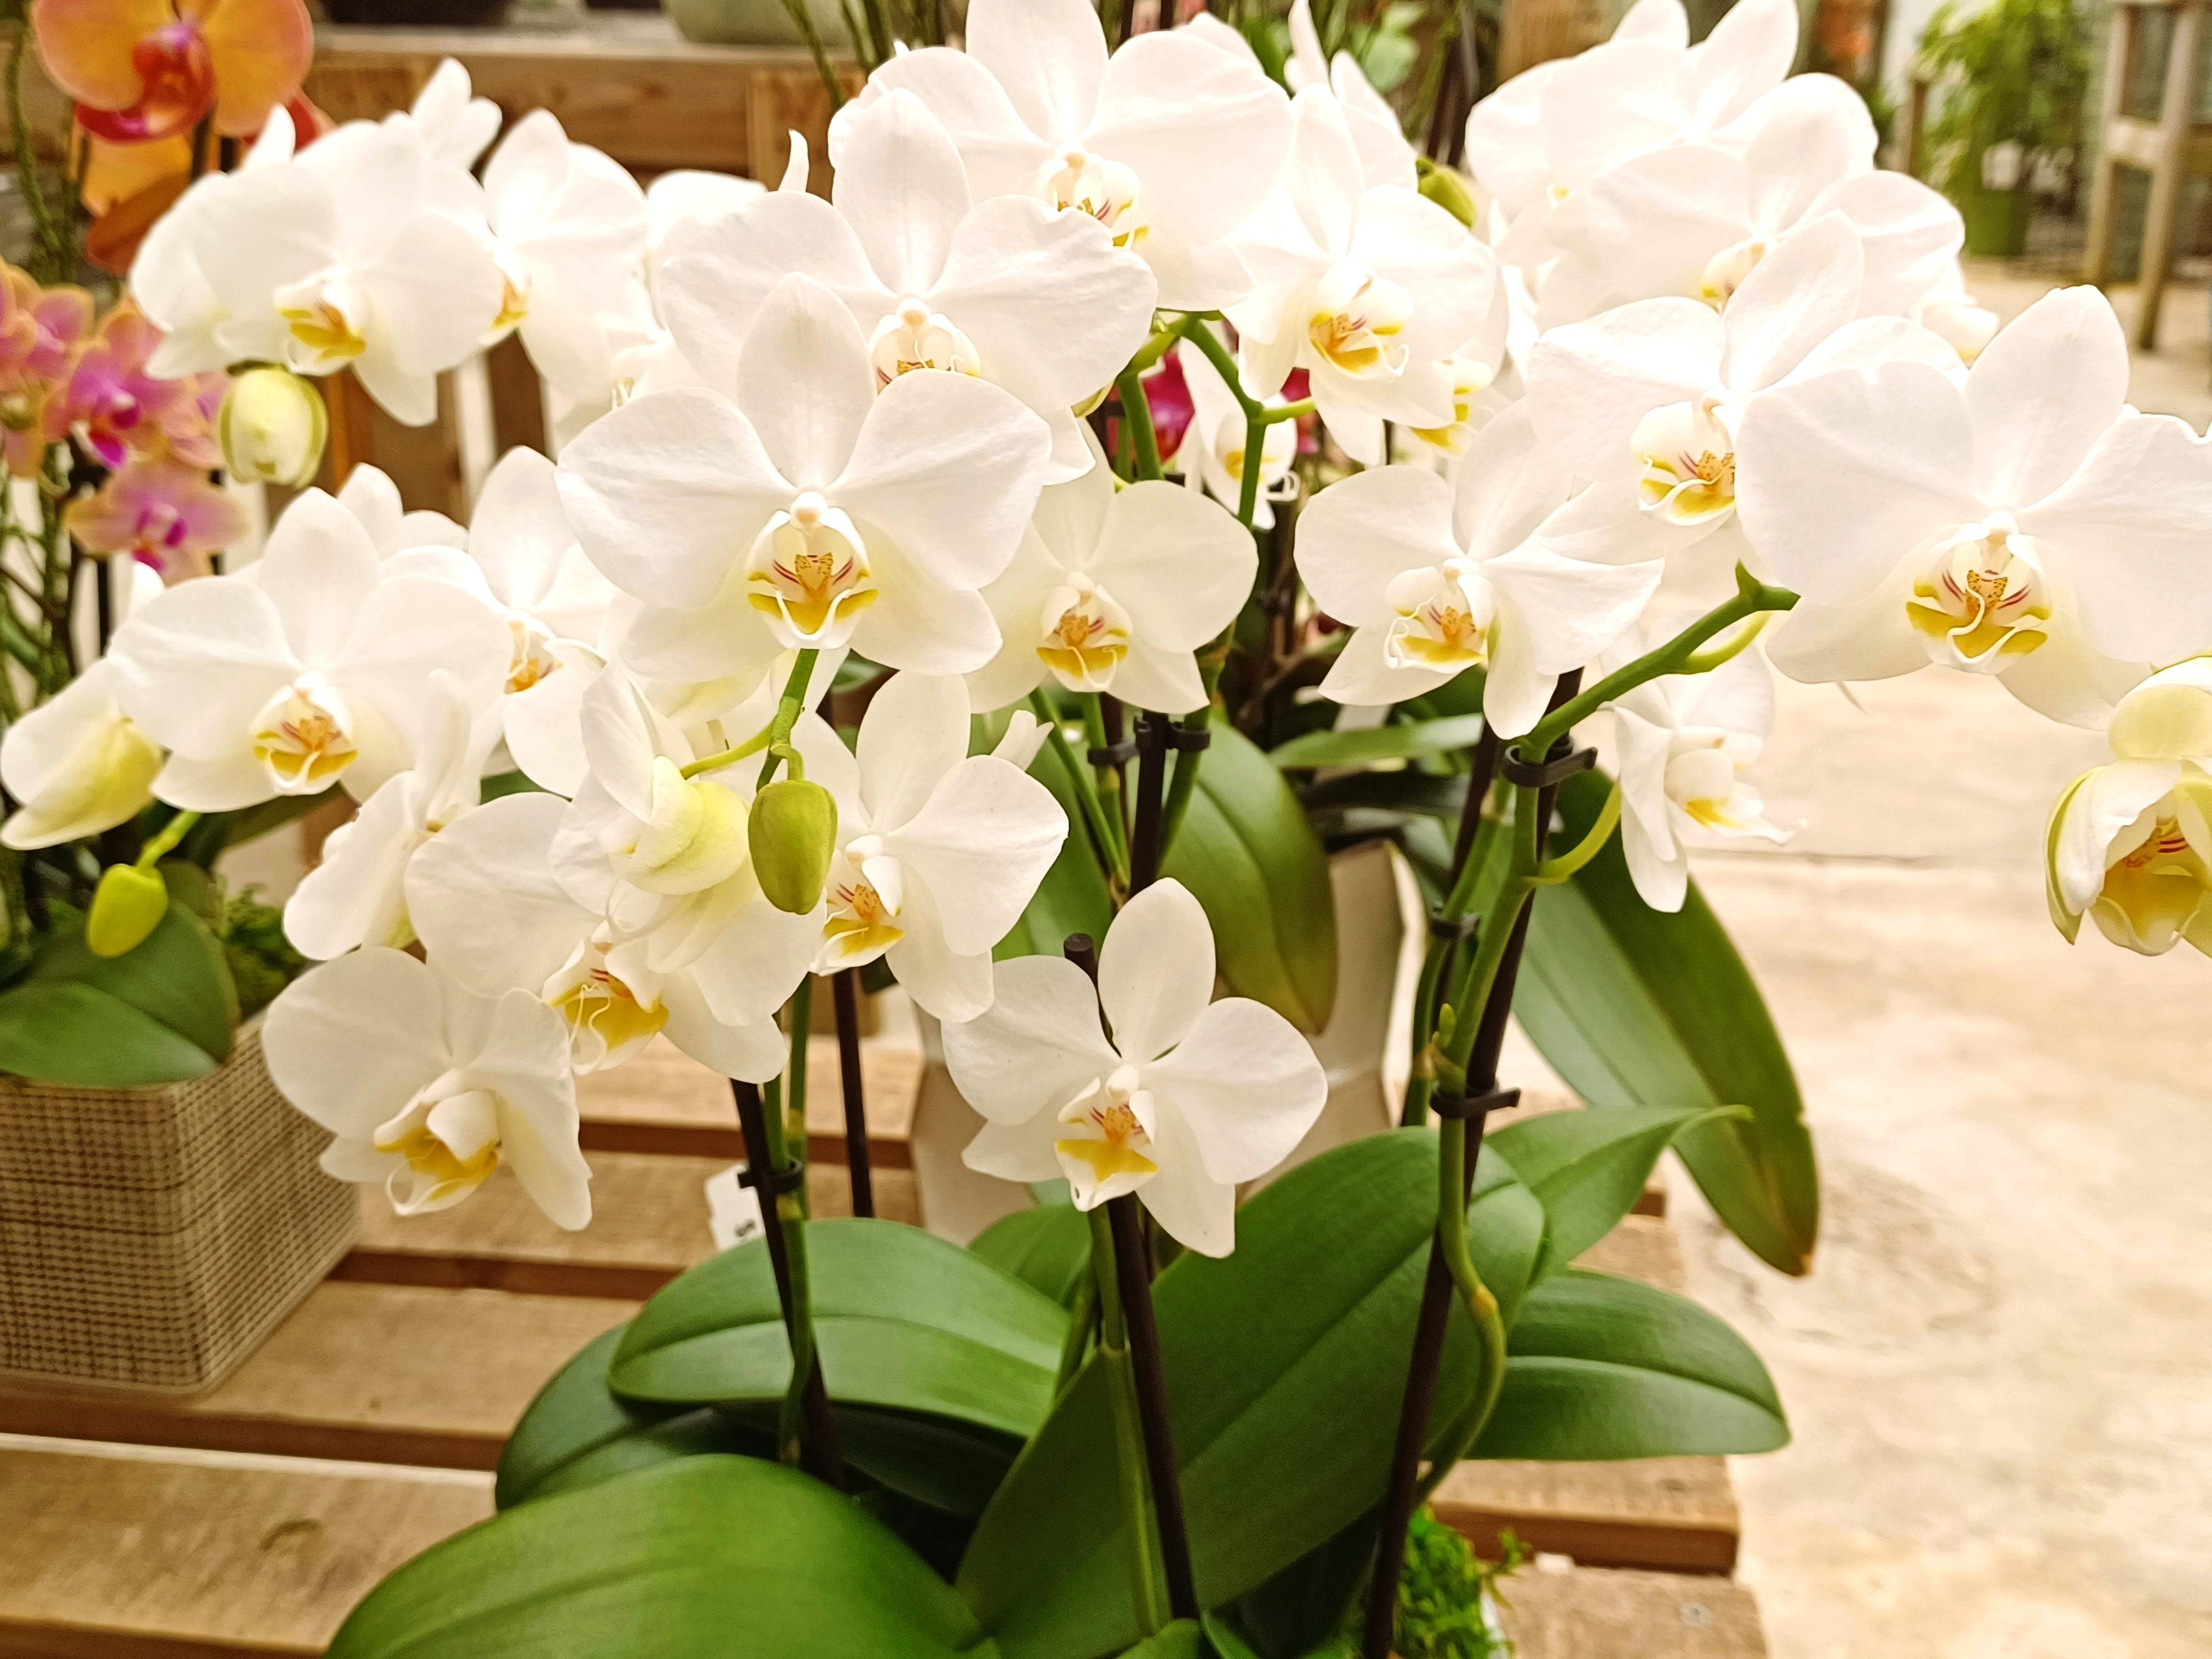 How to make orchids bloom